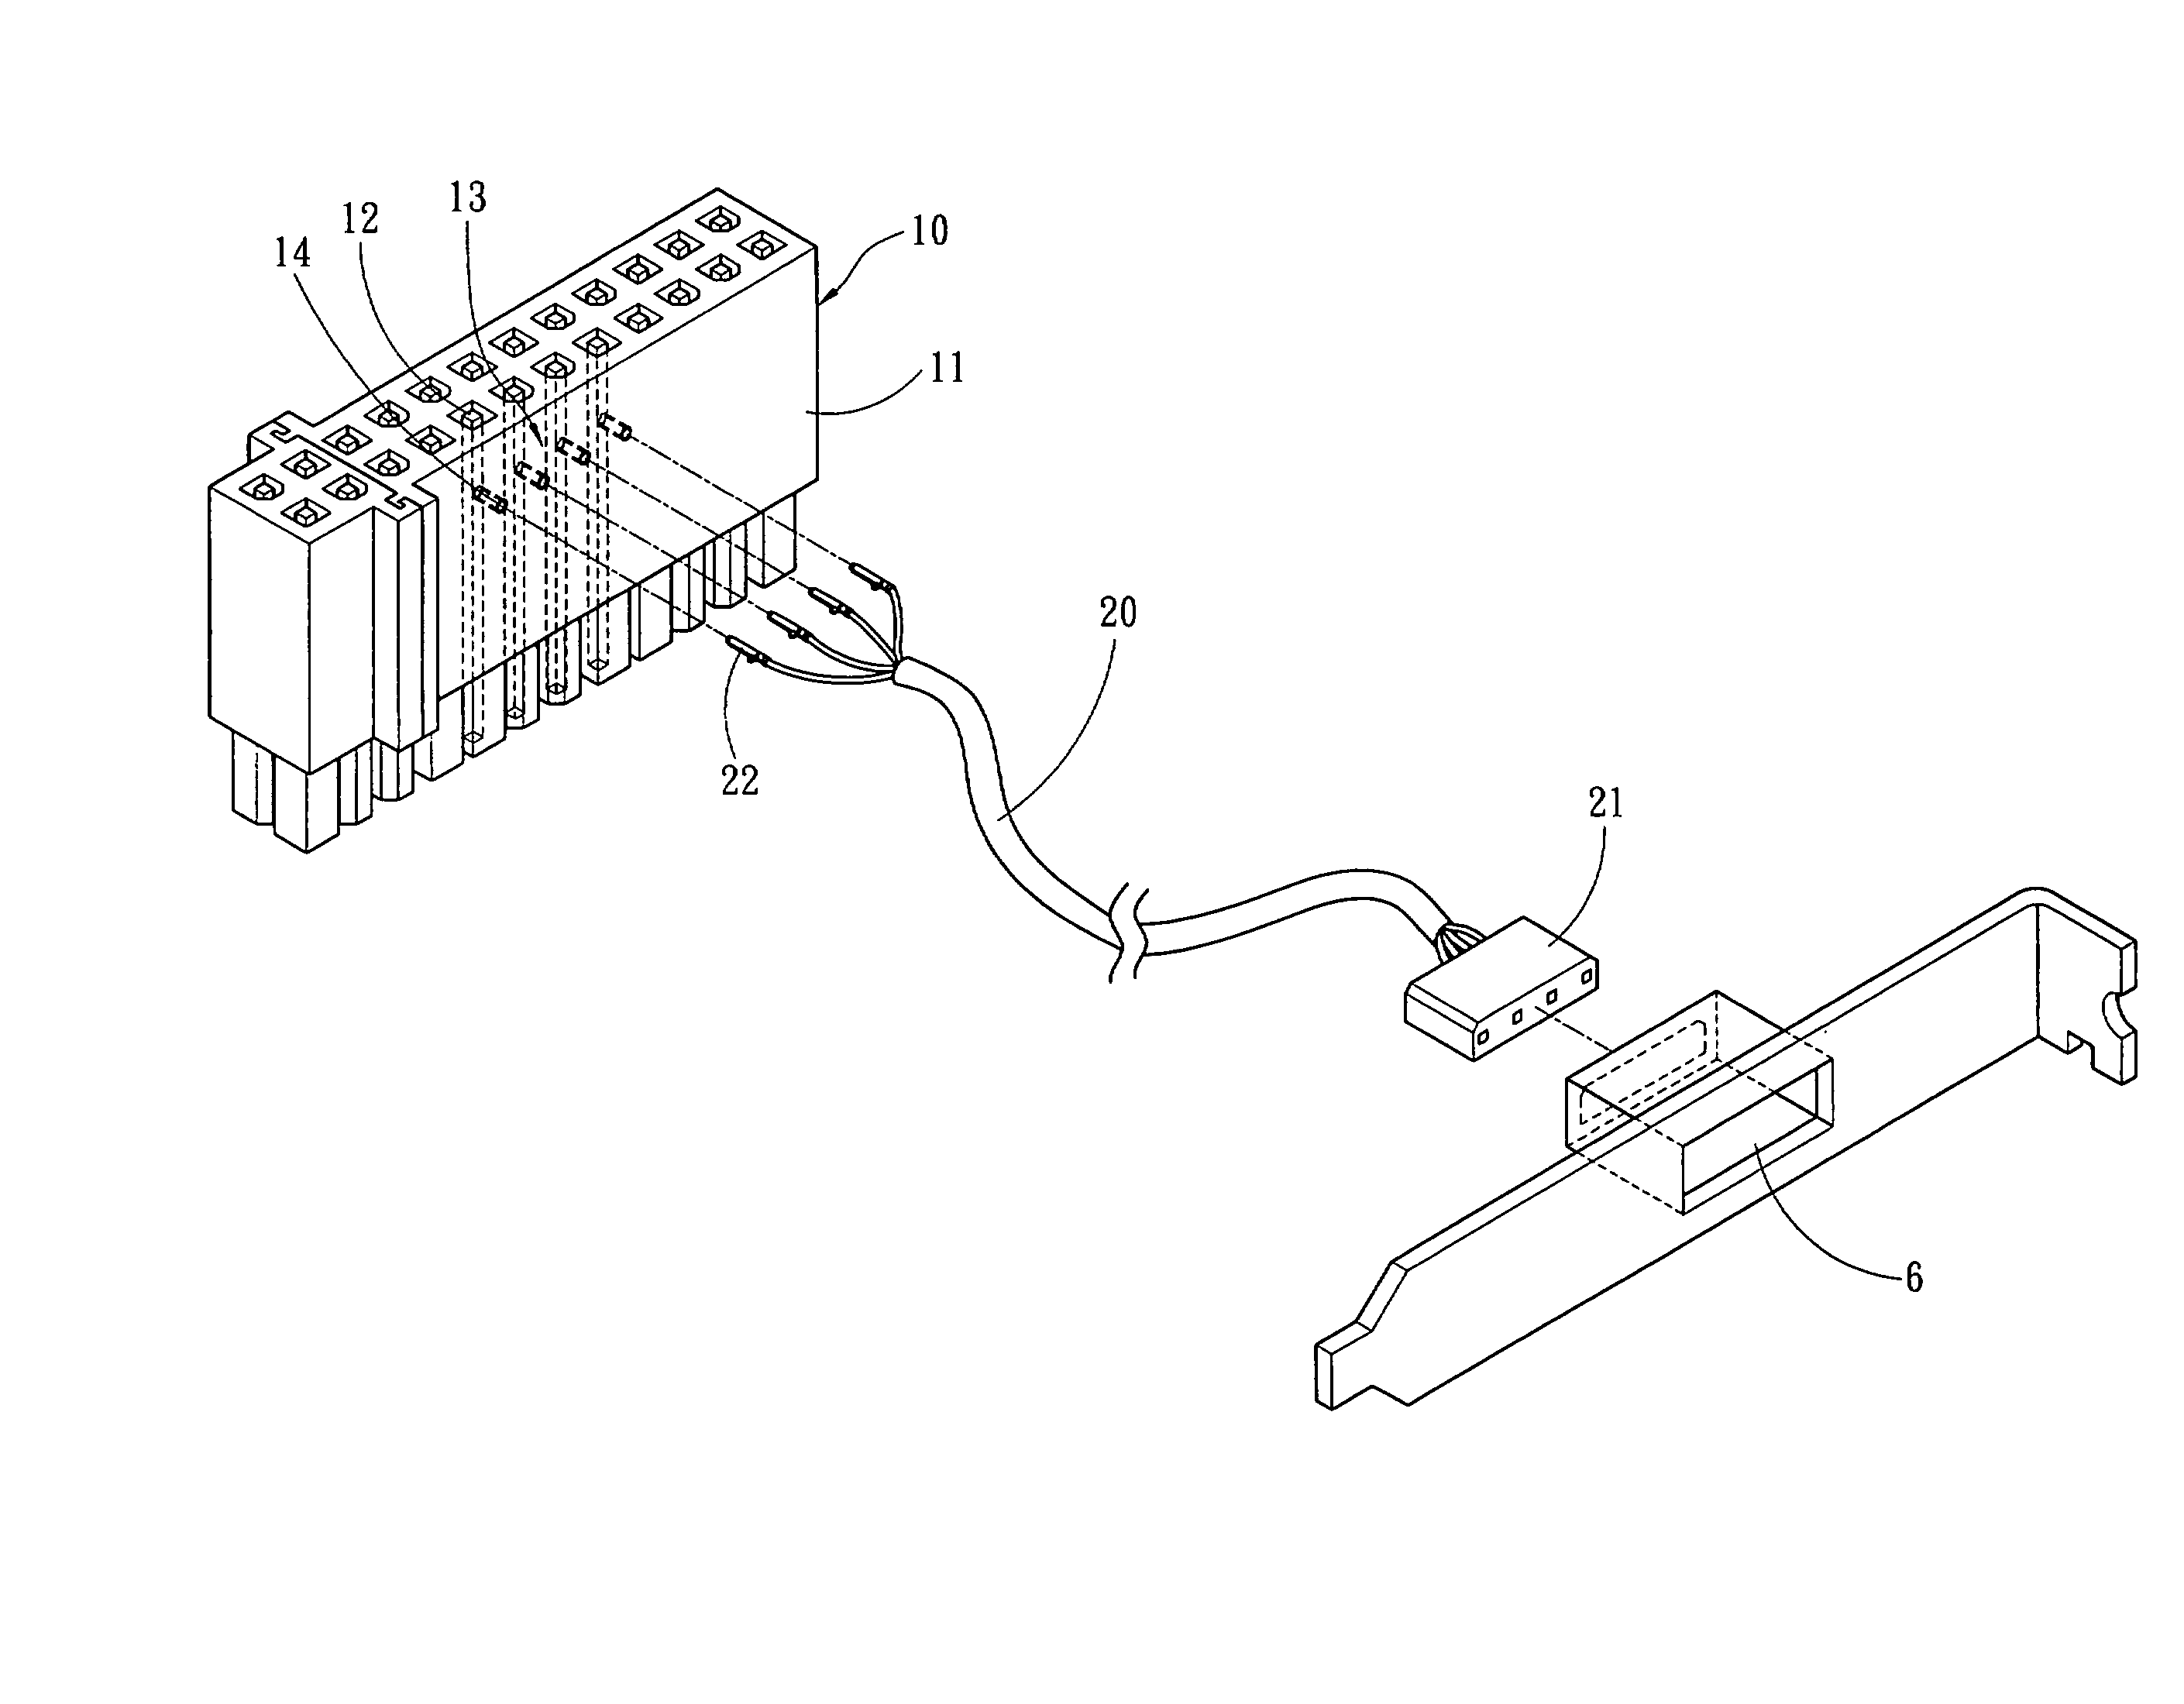 Electric power connector adapting structure